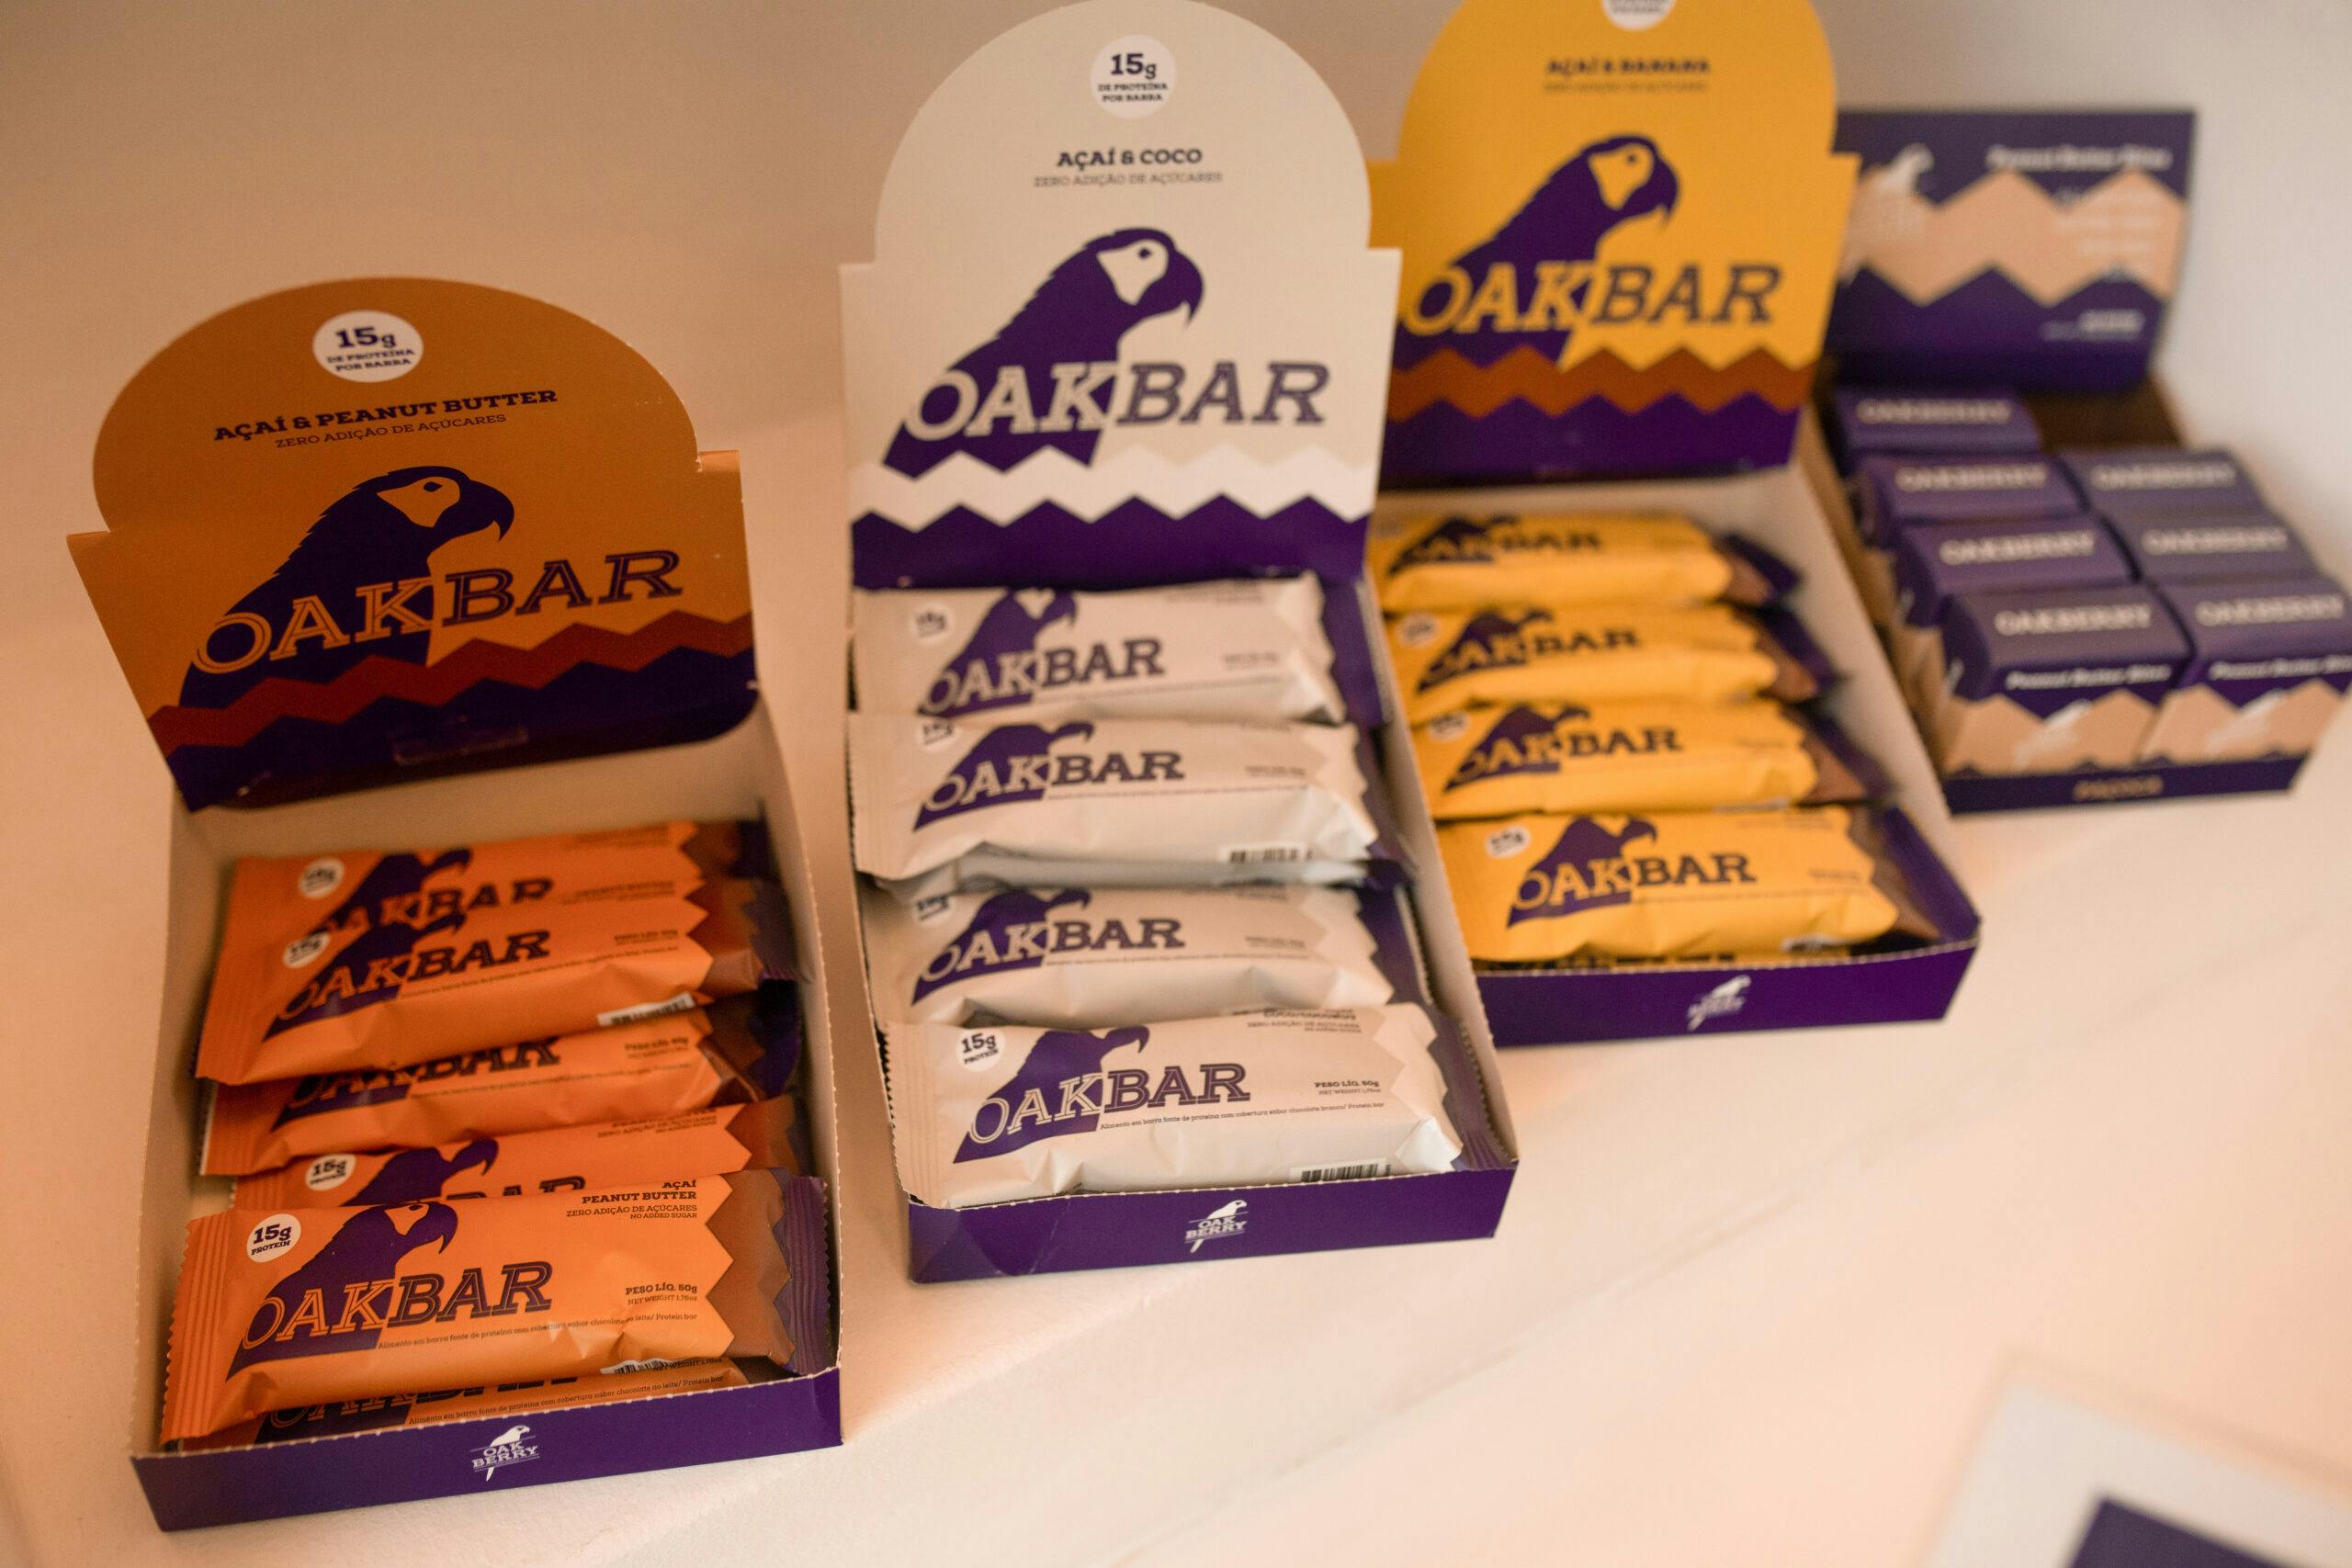 A table with displays of oakbars